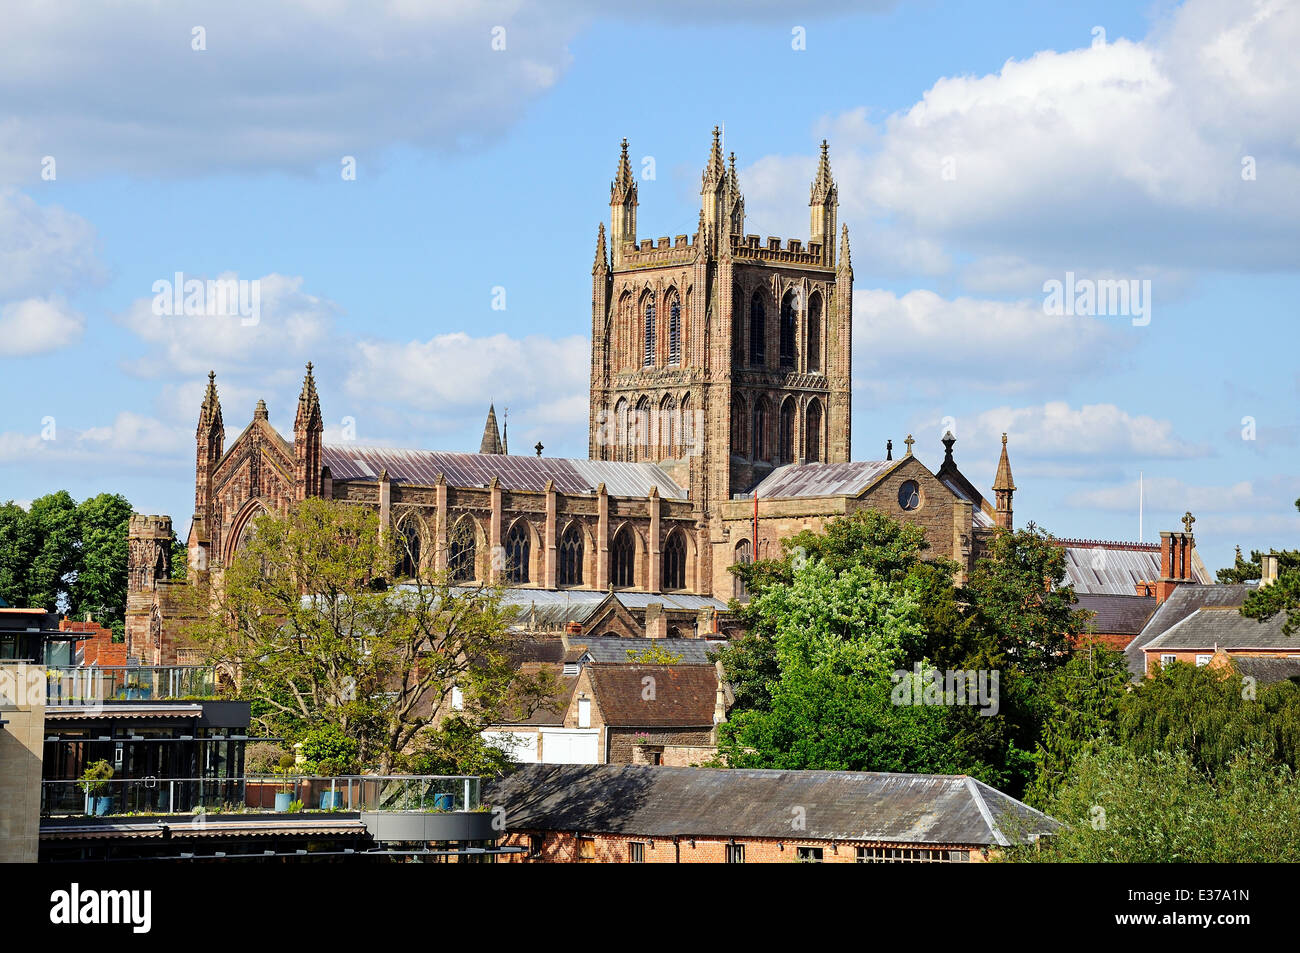 View of the Cathedral seen from the Wye Bridge, Hereford, Herefordshire, England, UK, Western Europe. Stock Photo